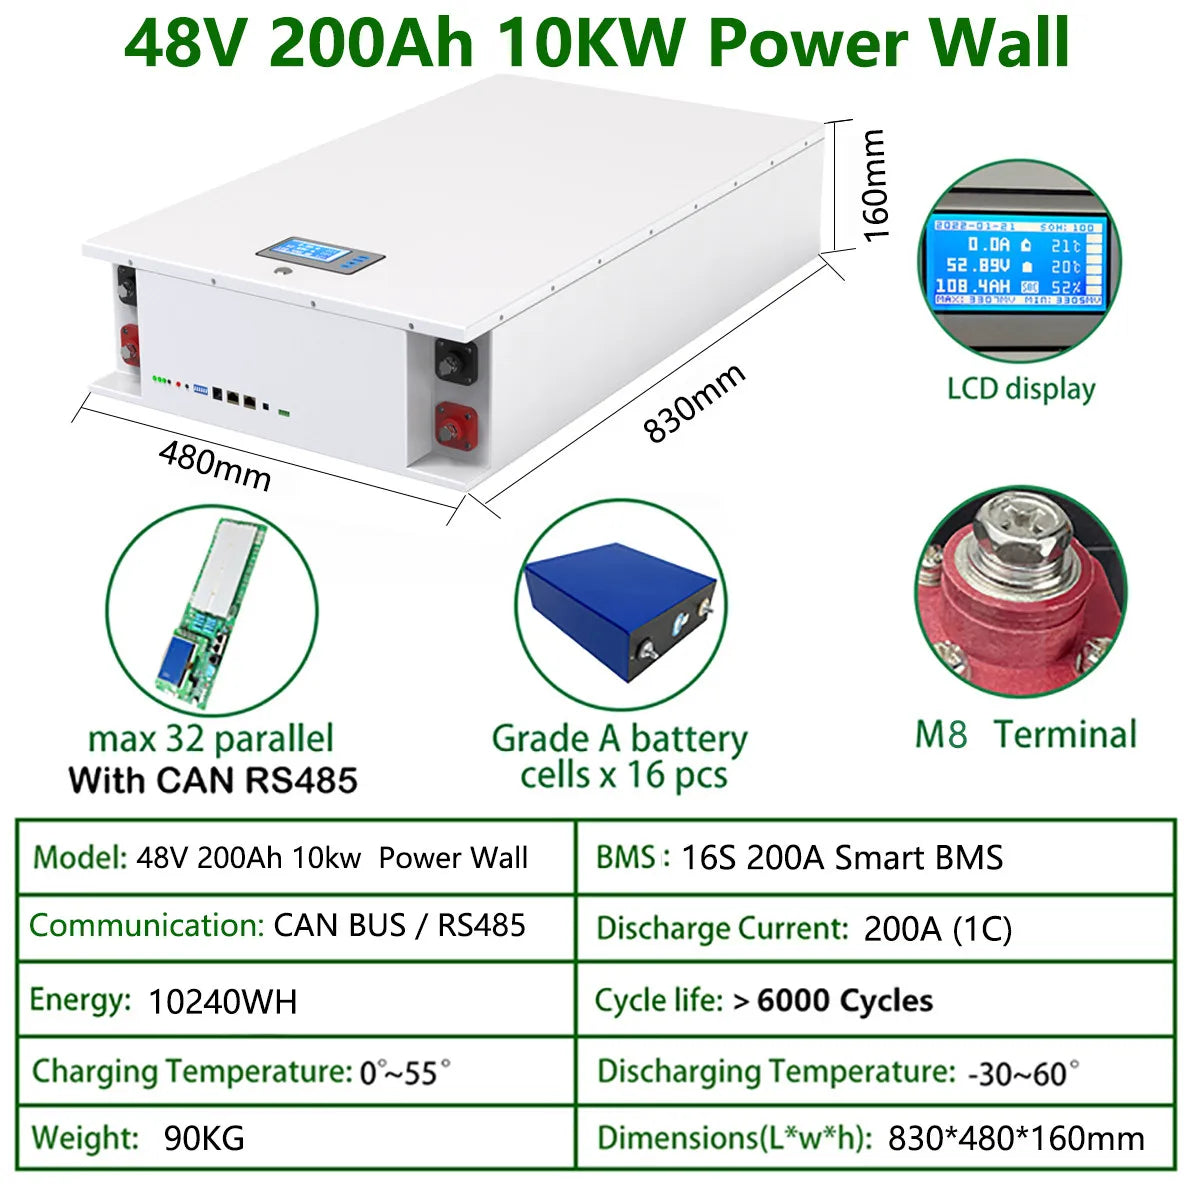 LiFePO4 48V 200AH Powerwall Battery, LiFePO4 Powerwall Battery Specifications: 48V, 200Ah, 10kW with LCD display and advanced communication protocols.